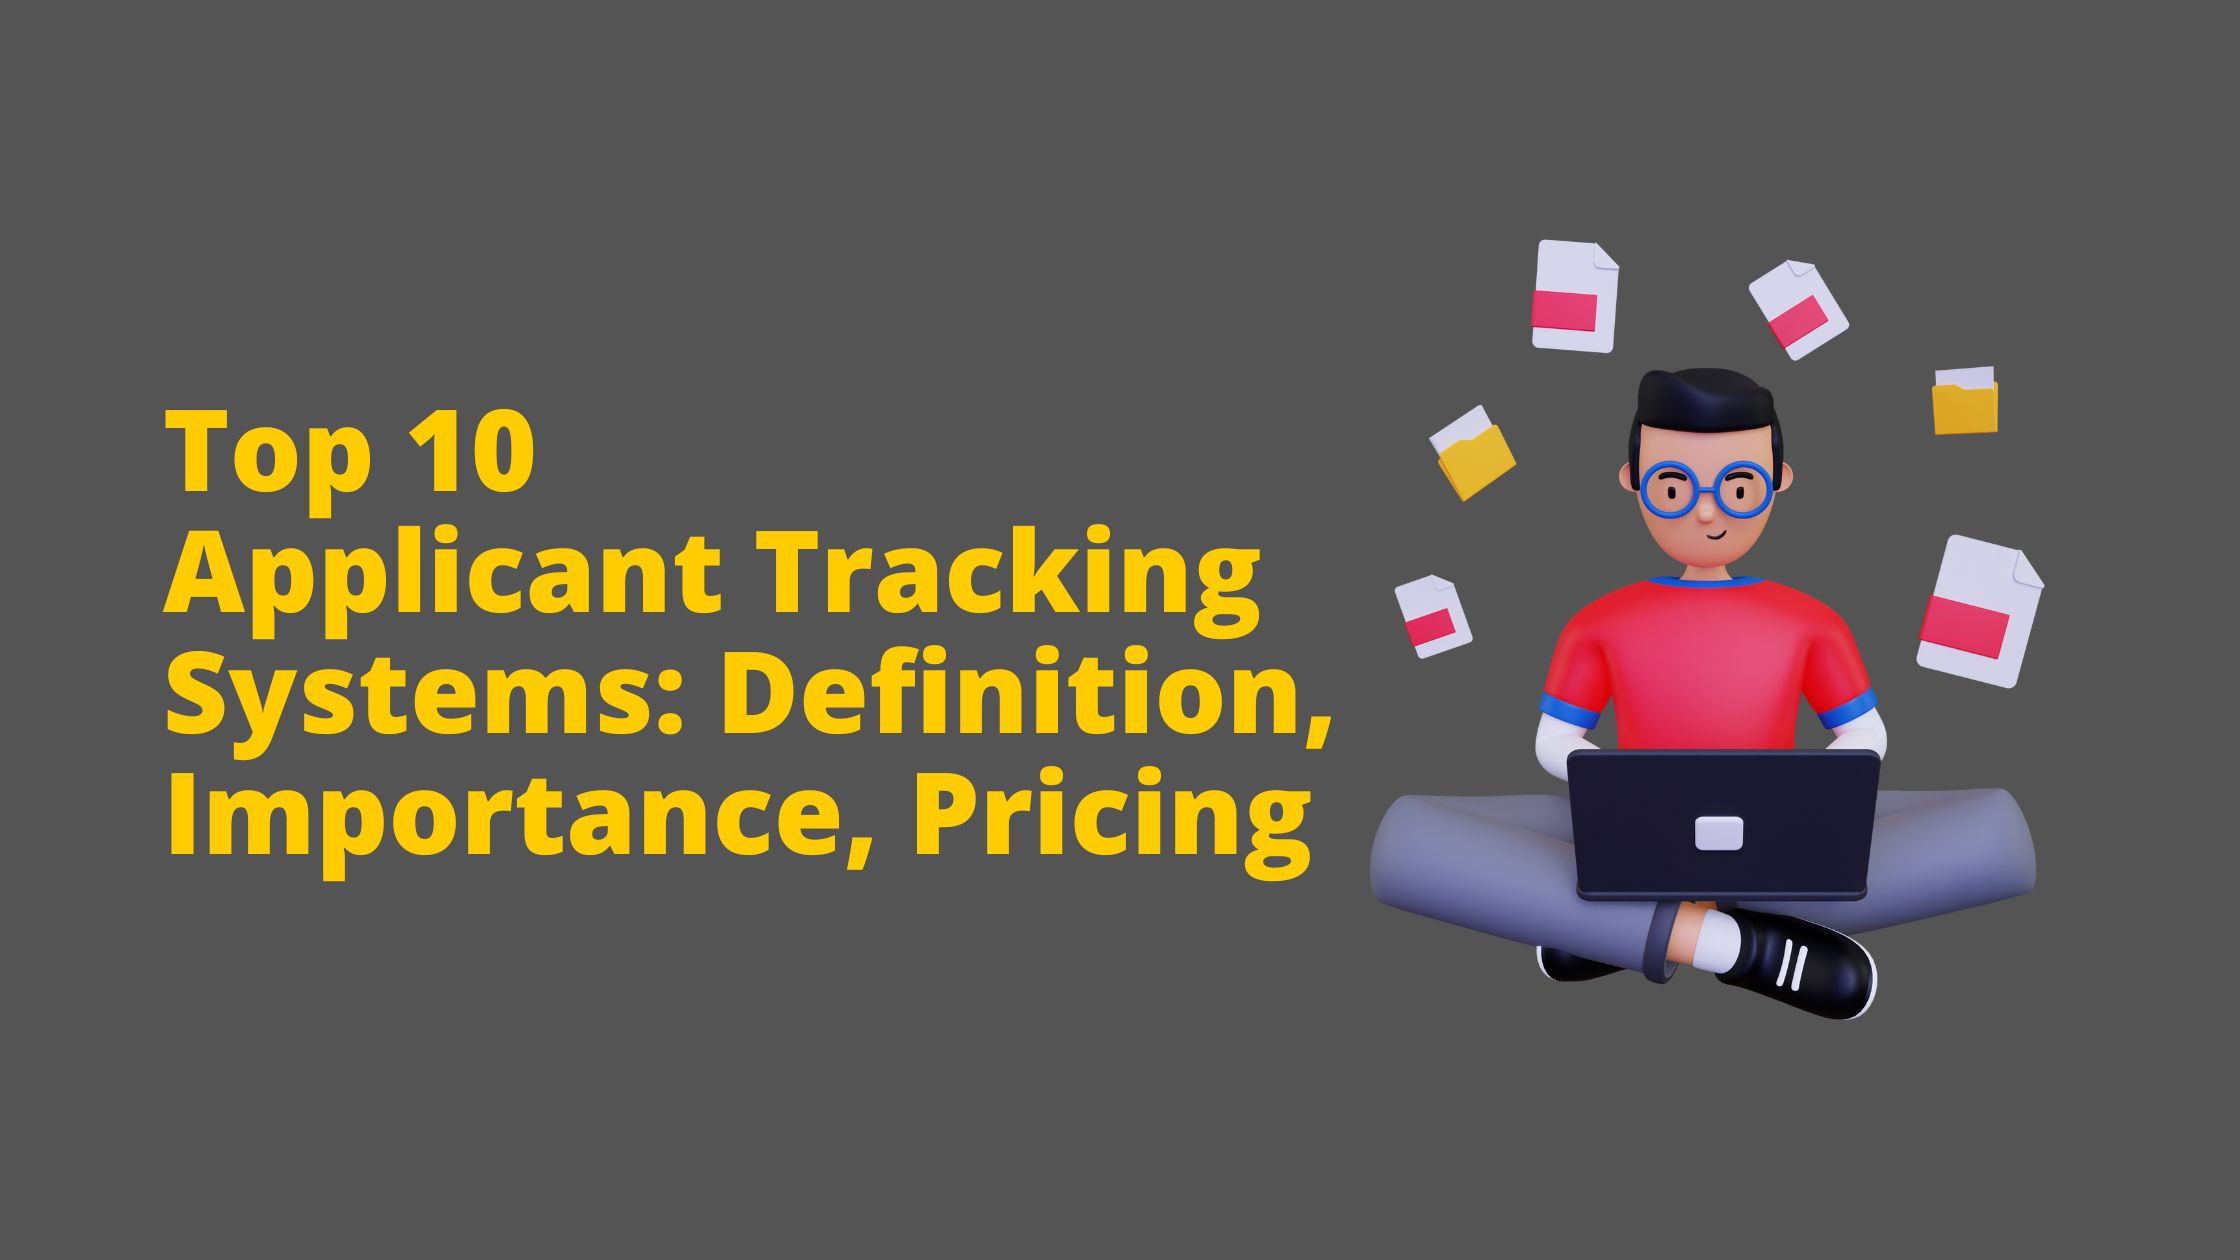 Top 10 Applicant Tracking Systems (ATS): Definition, Importance, Pricing